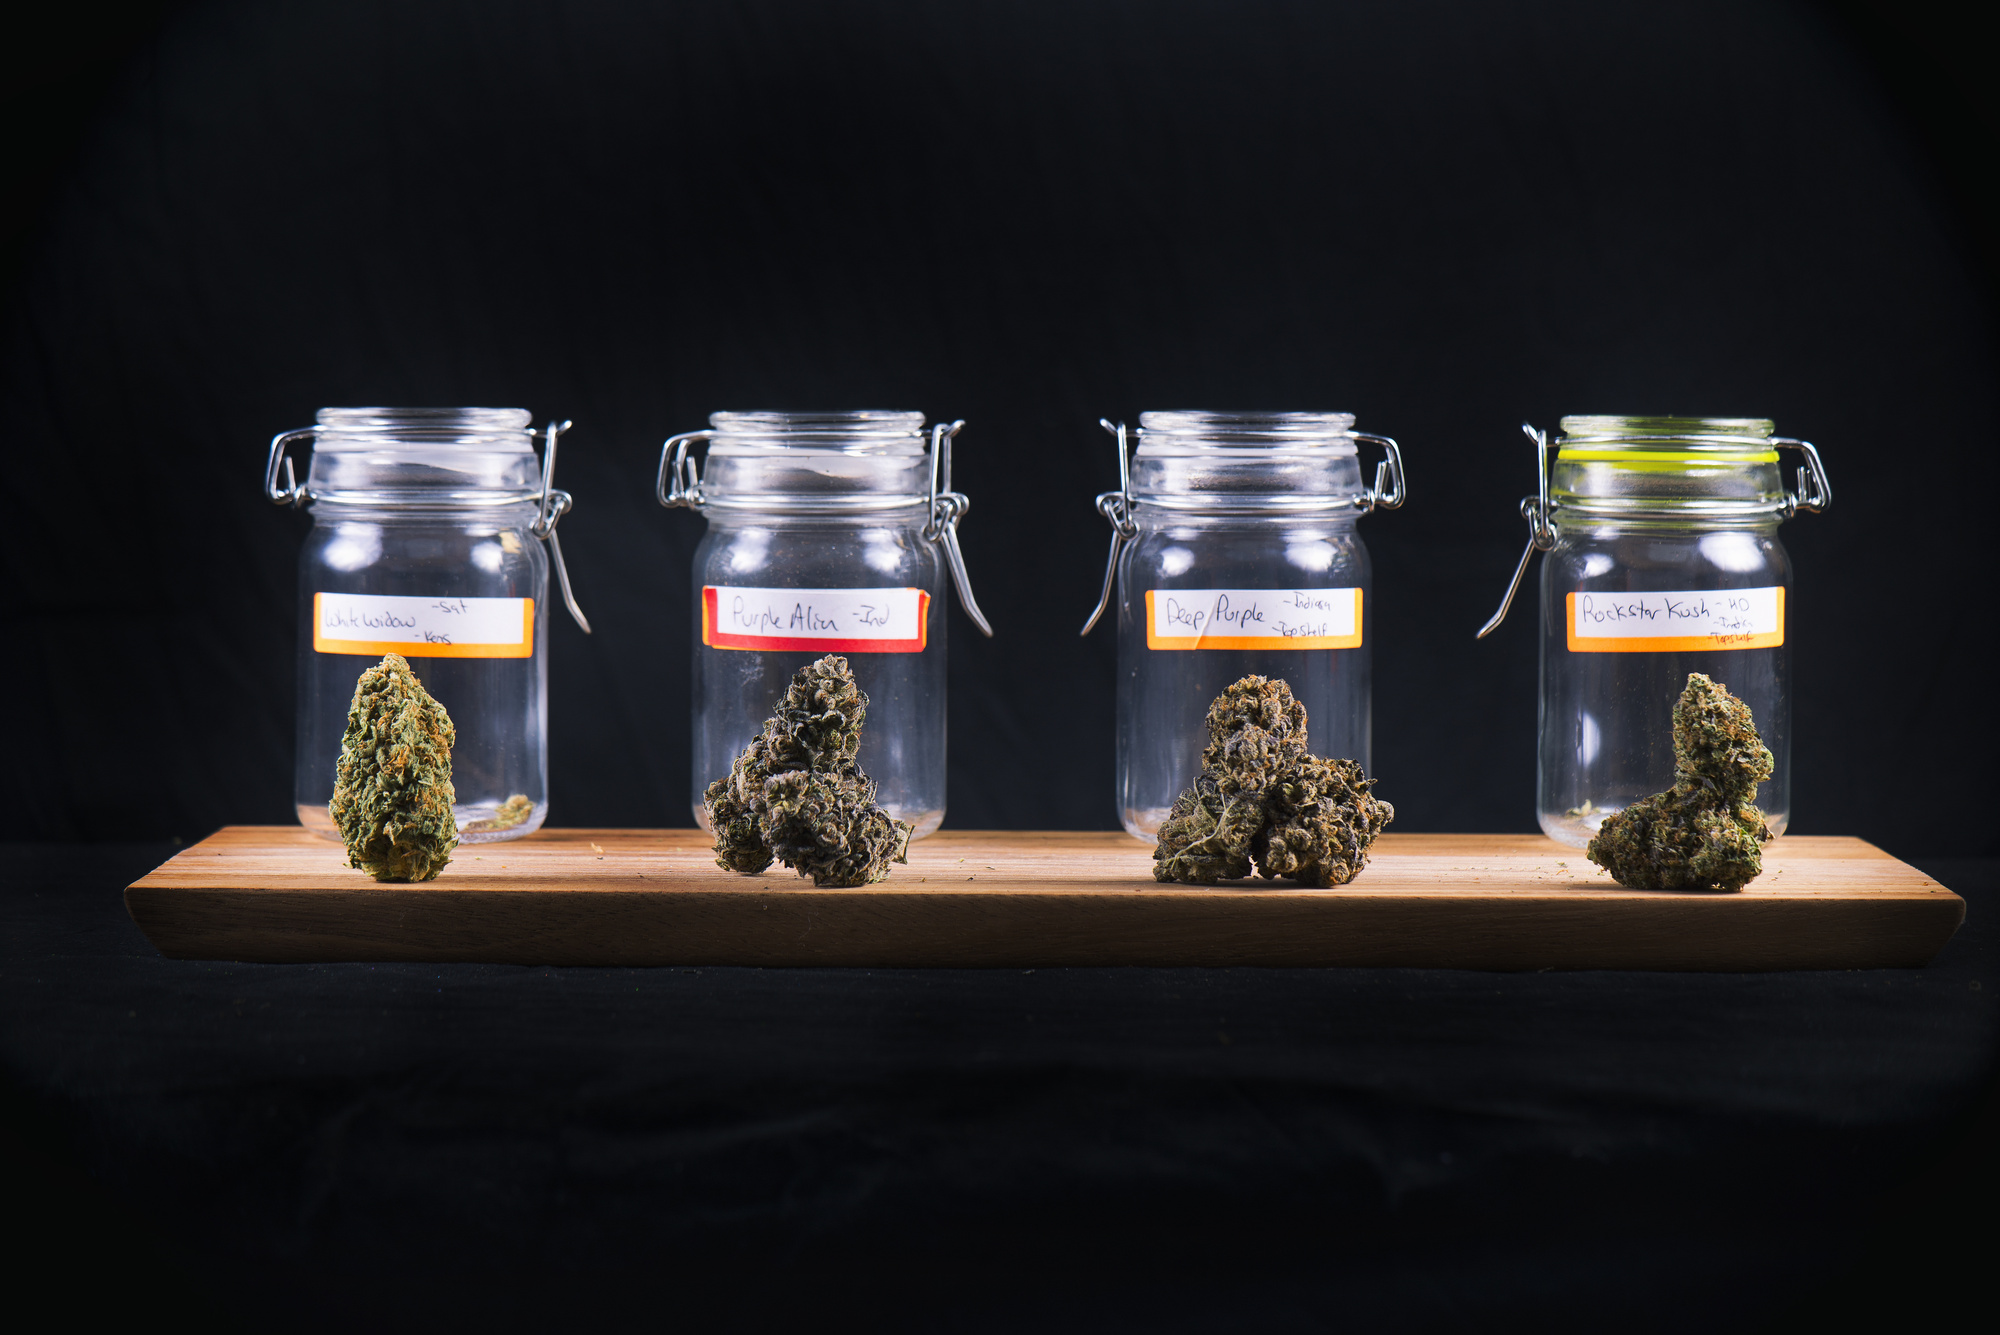 Most Popular Weed Strains